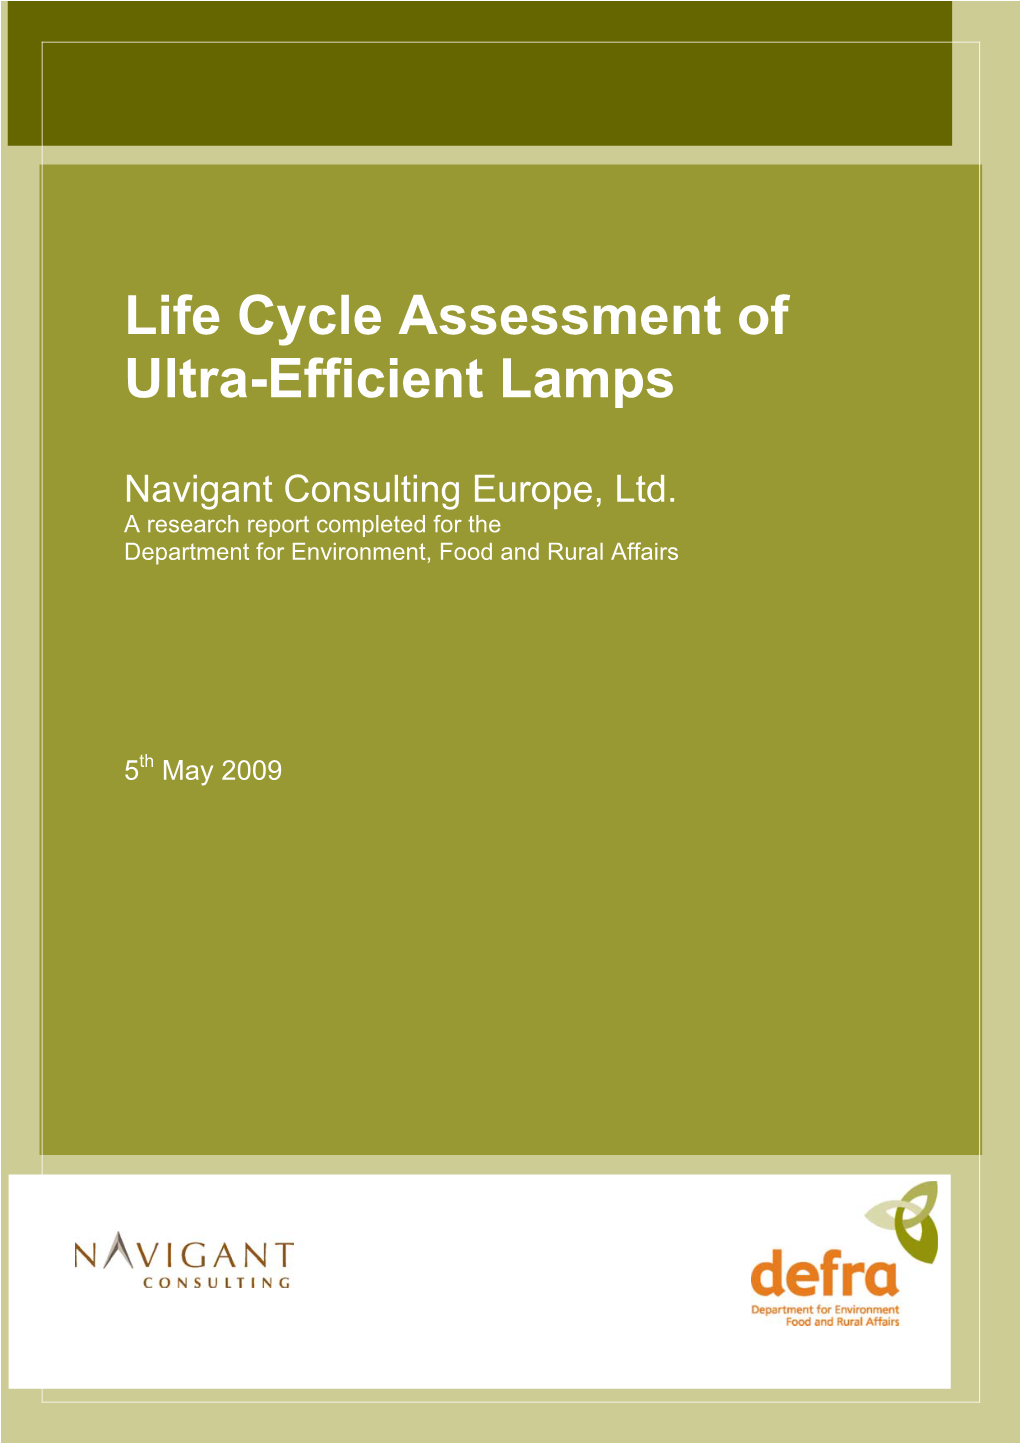 Life Cycle Assessment of Ultra-Efficient Lamps